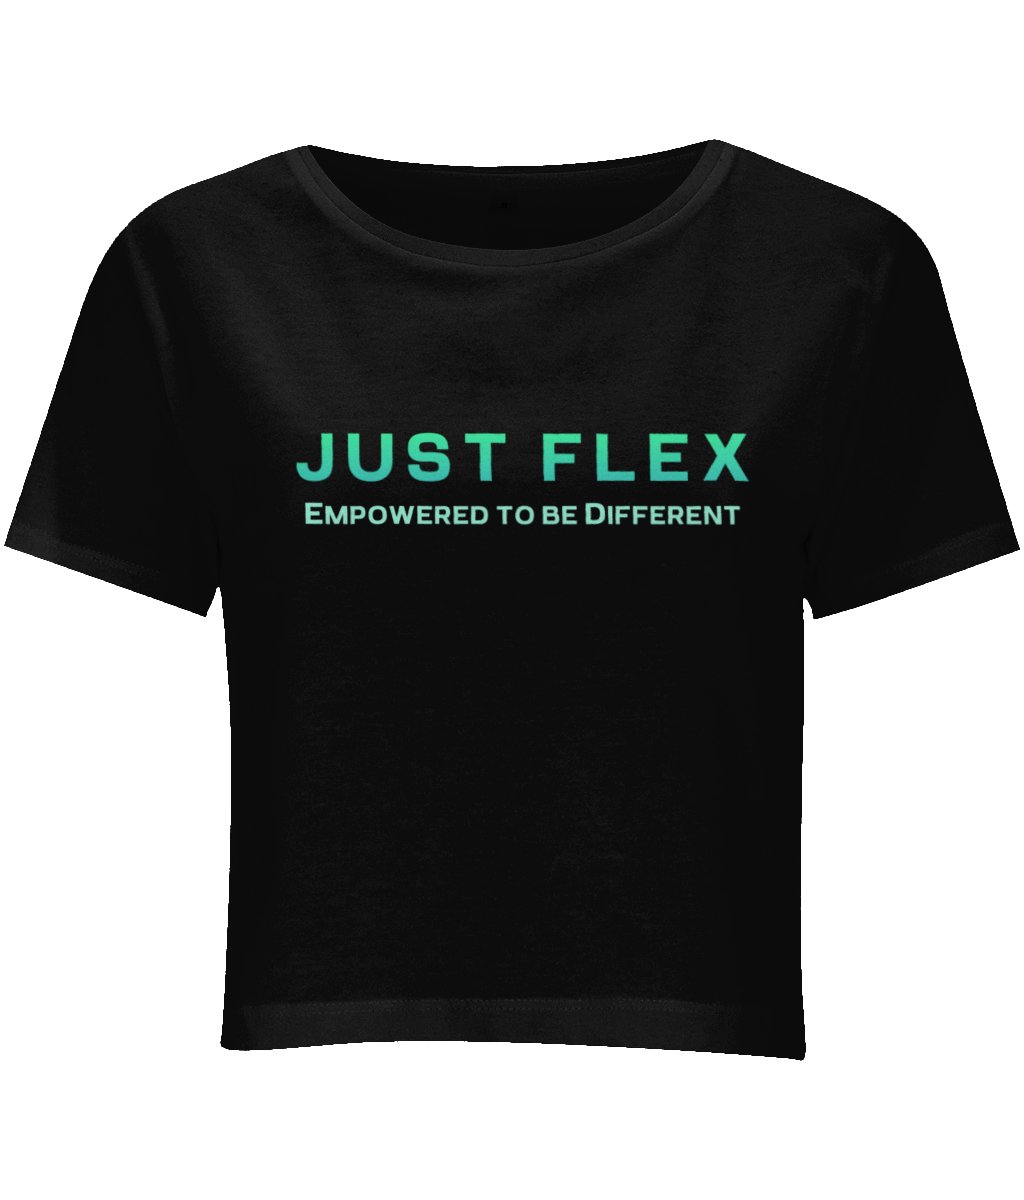 Just Flex - Empowered To Be Different Women's Cropped Tee